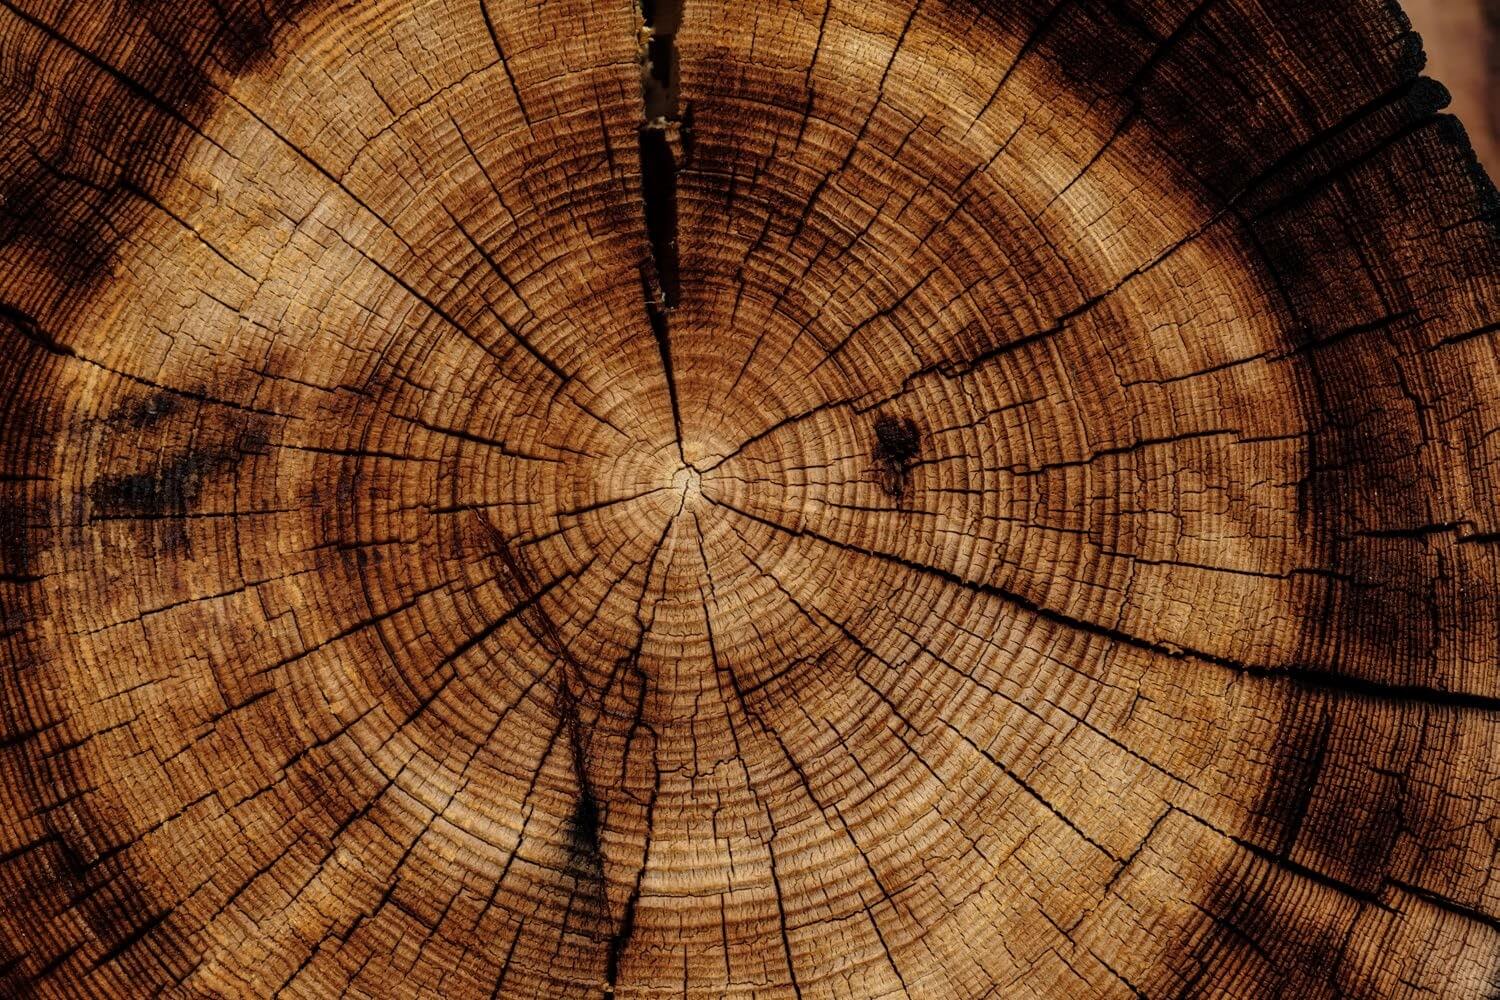 The rings of a tree